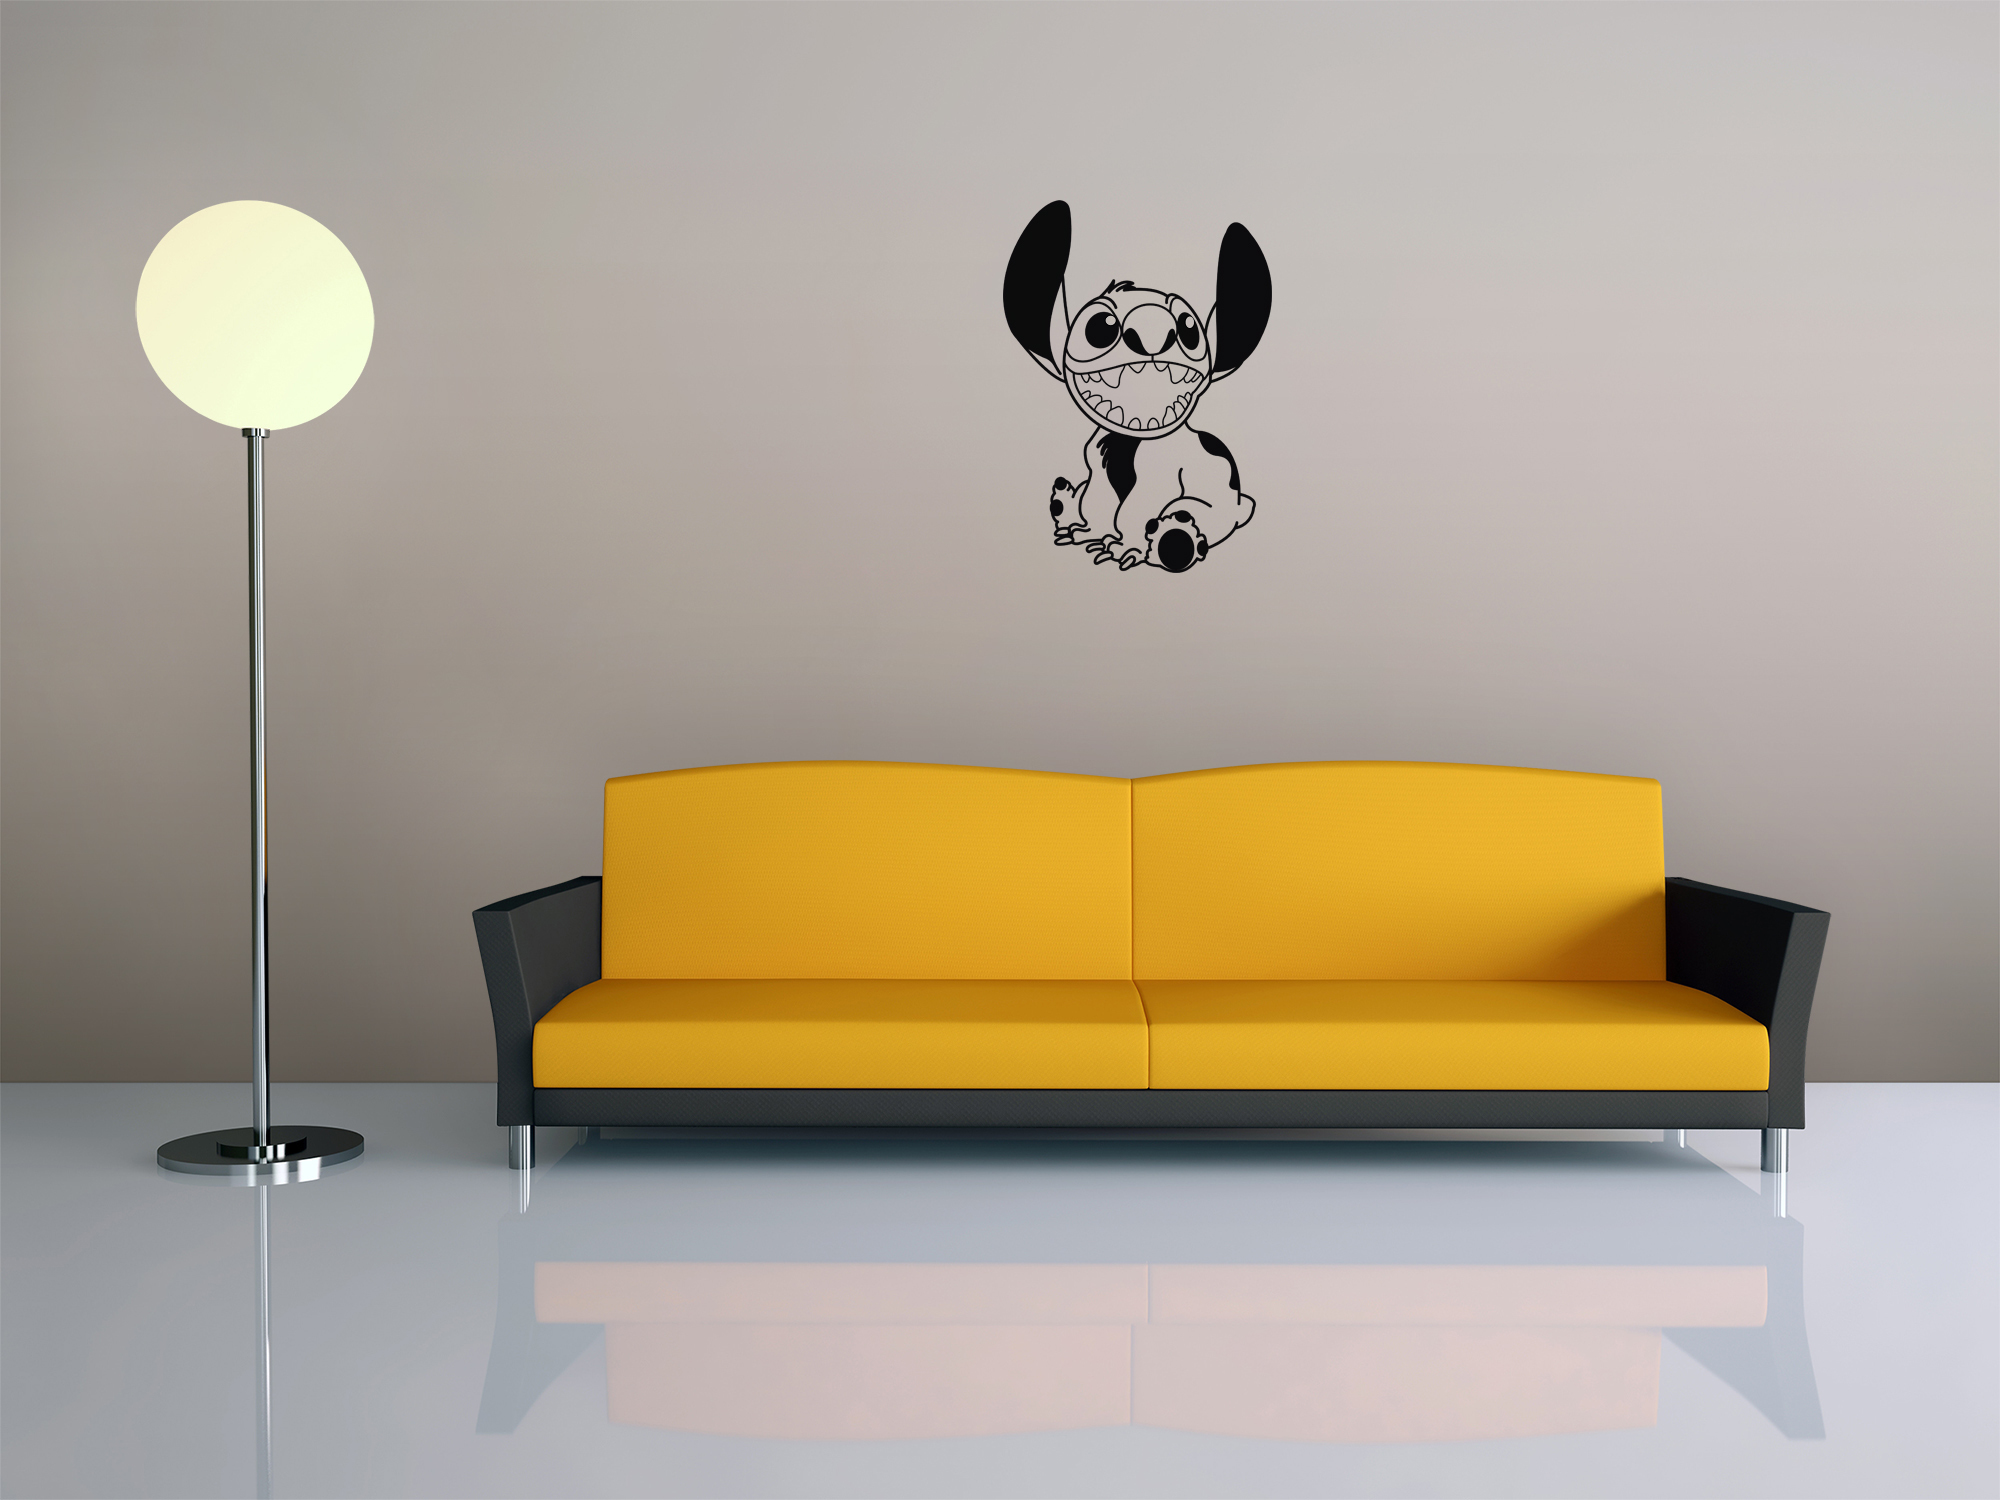 3D Printed Stitch, Wall by maria17